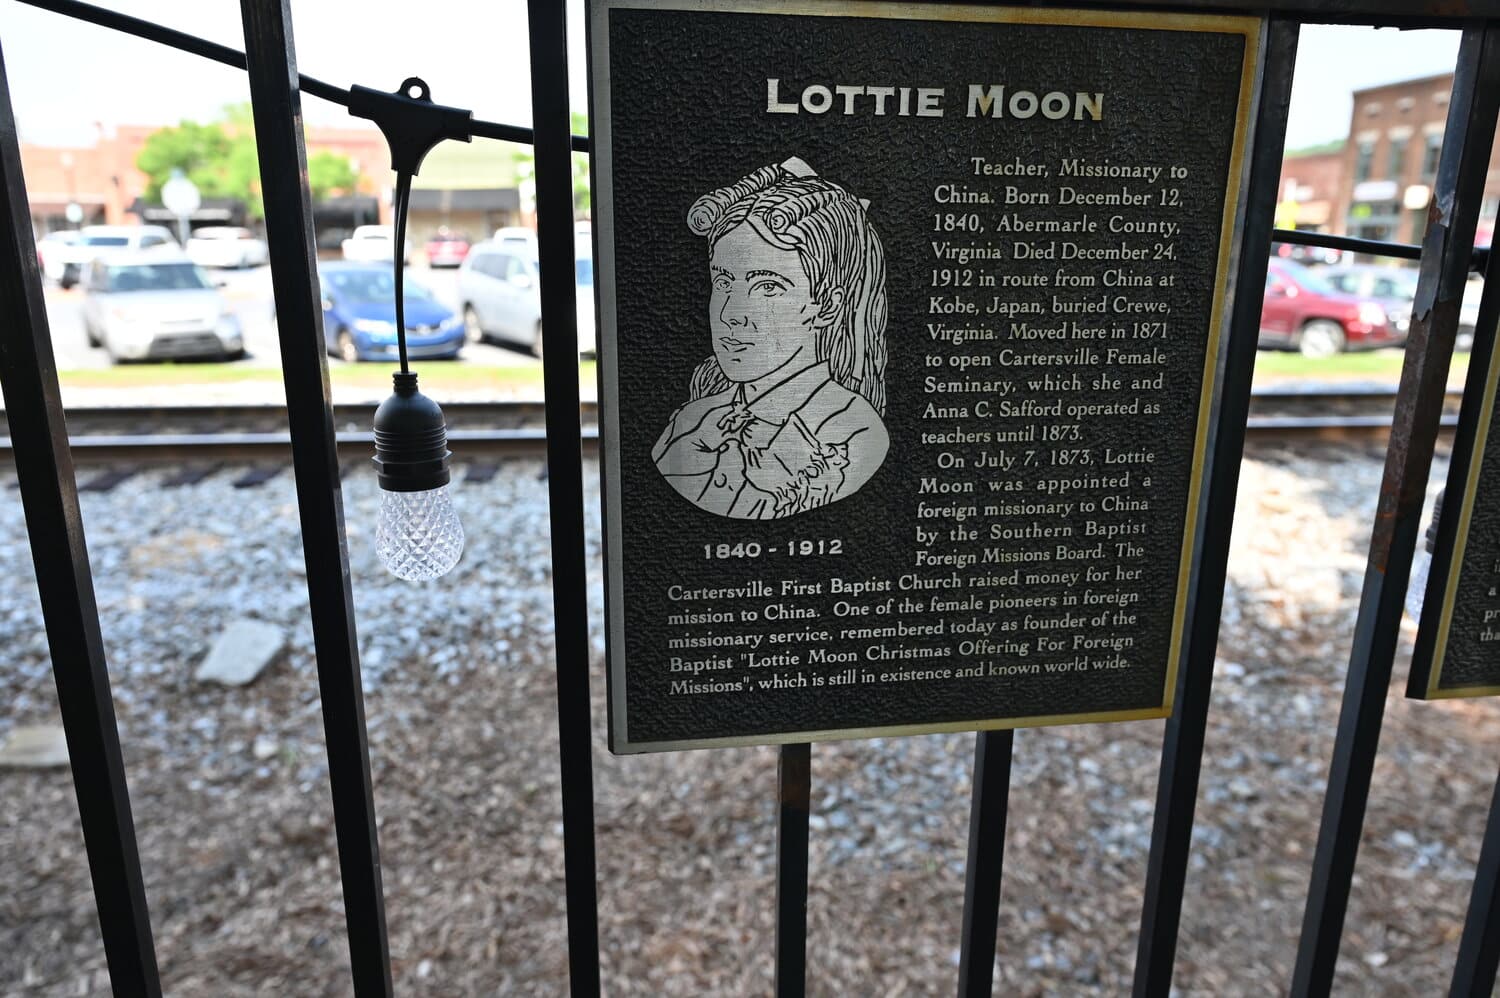 Famed missionary Lottie Moon’s impact on Georgia town still being felt 150 years later